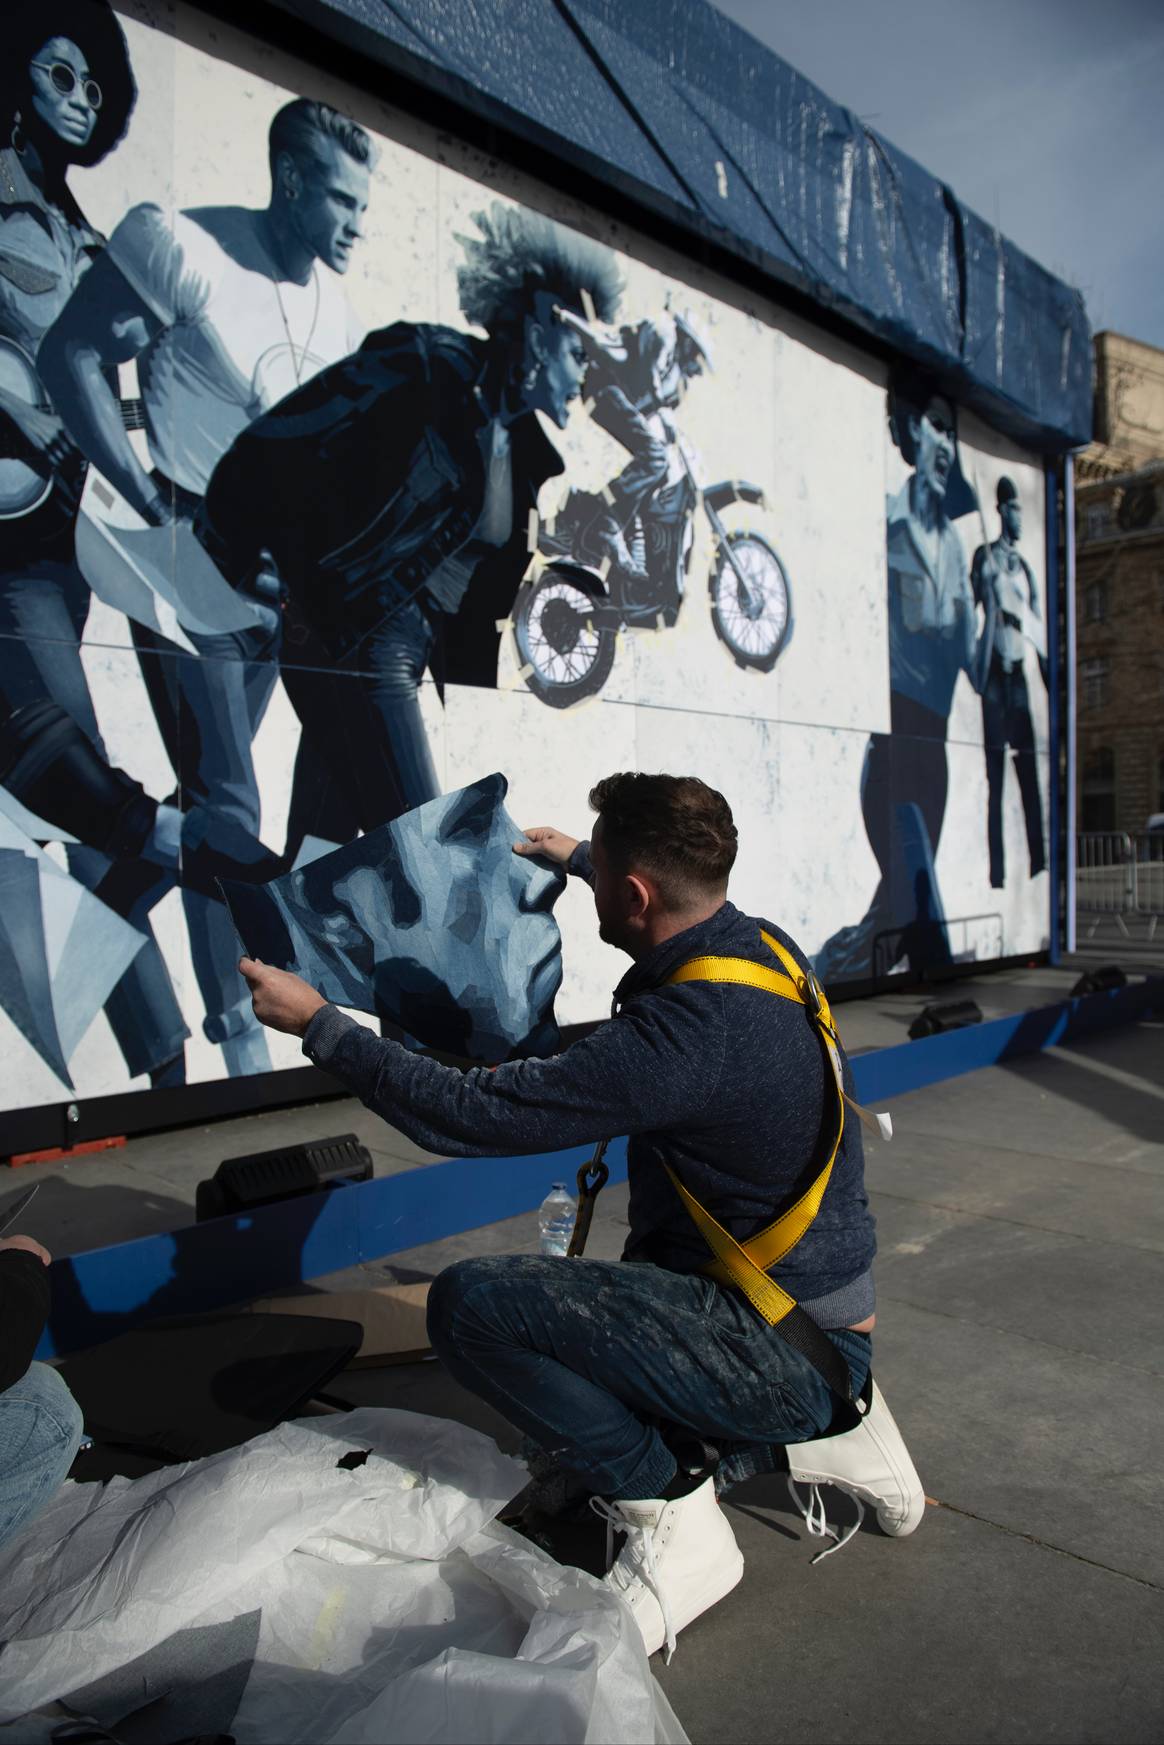 Though large scale, each part of the mural is detailed. “That’s how I work”, says Berry. Image: Kristy Sparow